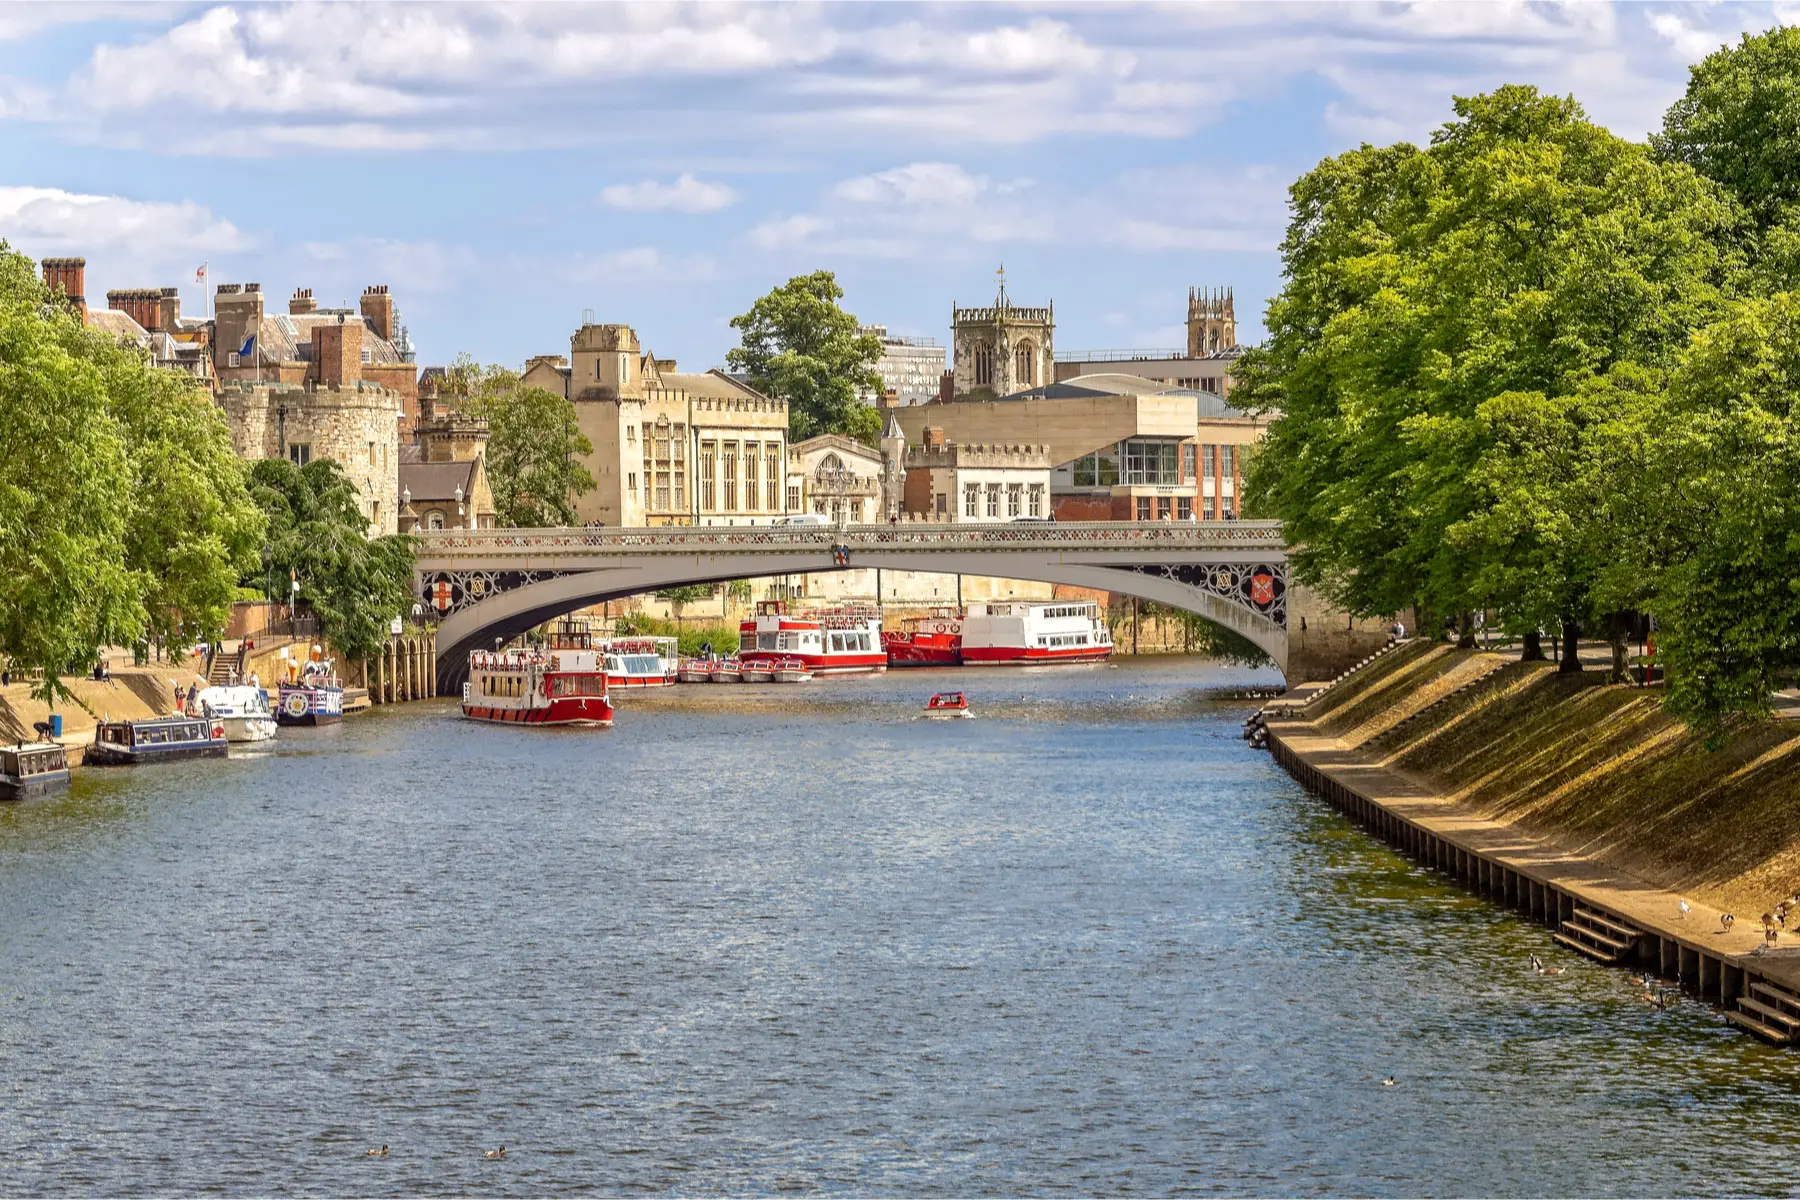 view of the River Ouse flowing through York, UK